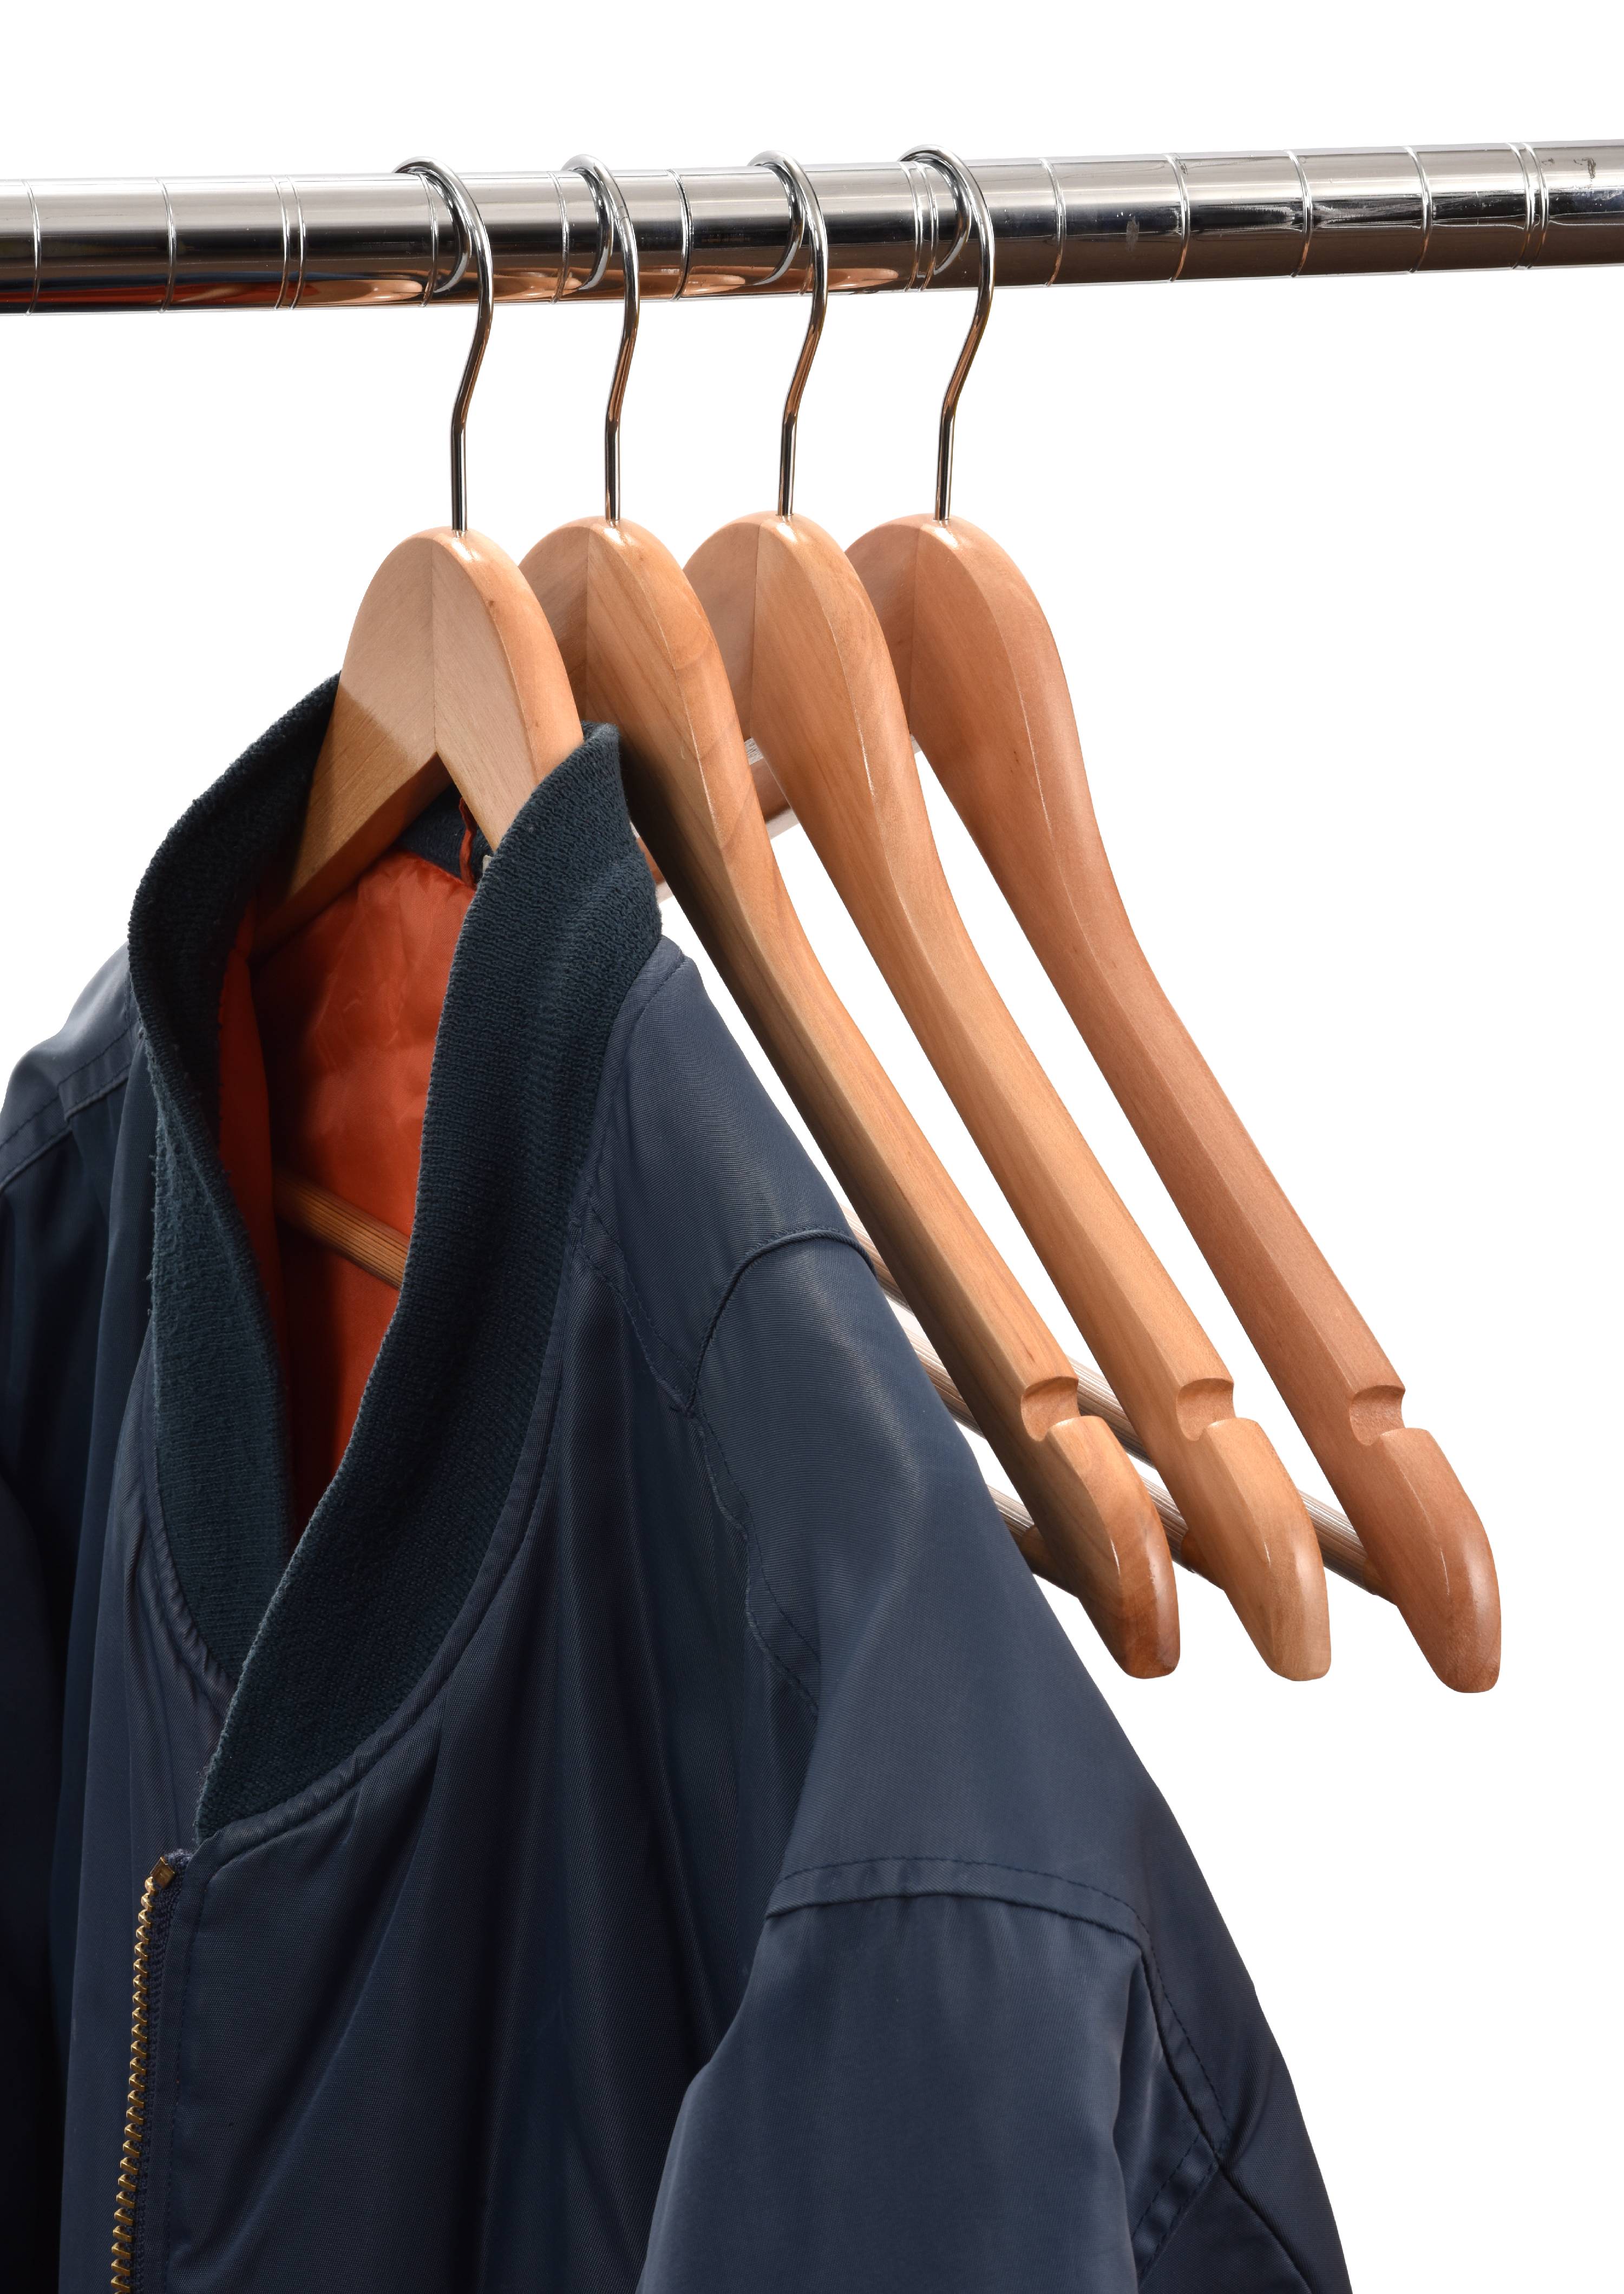 Wood Suit Hangers - 30 Pack, Natural - image 3 of 3